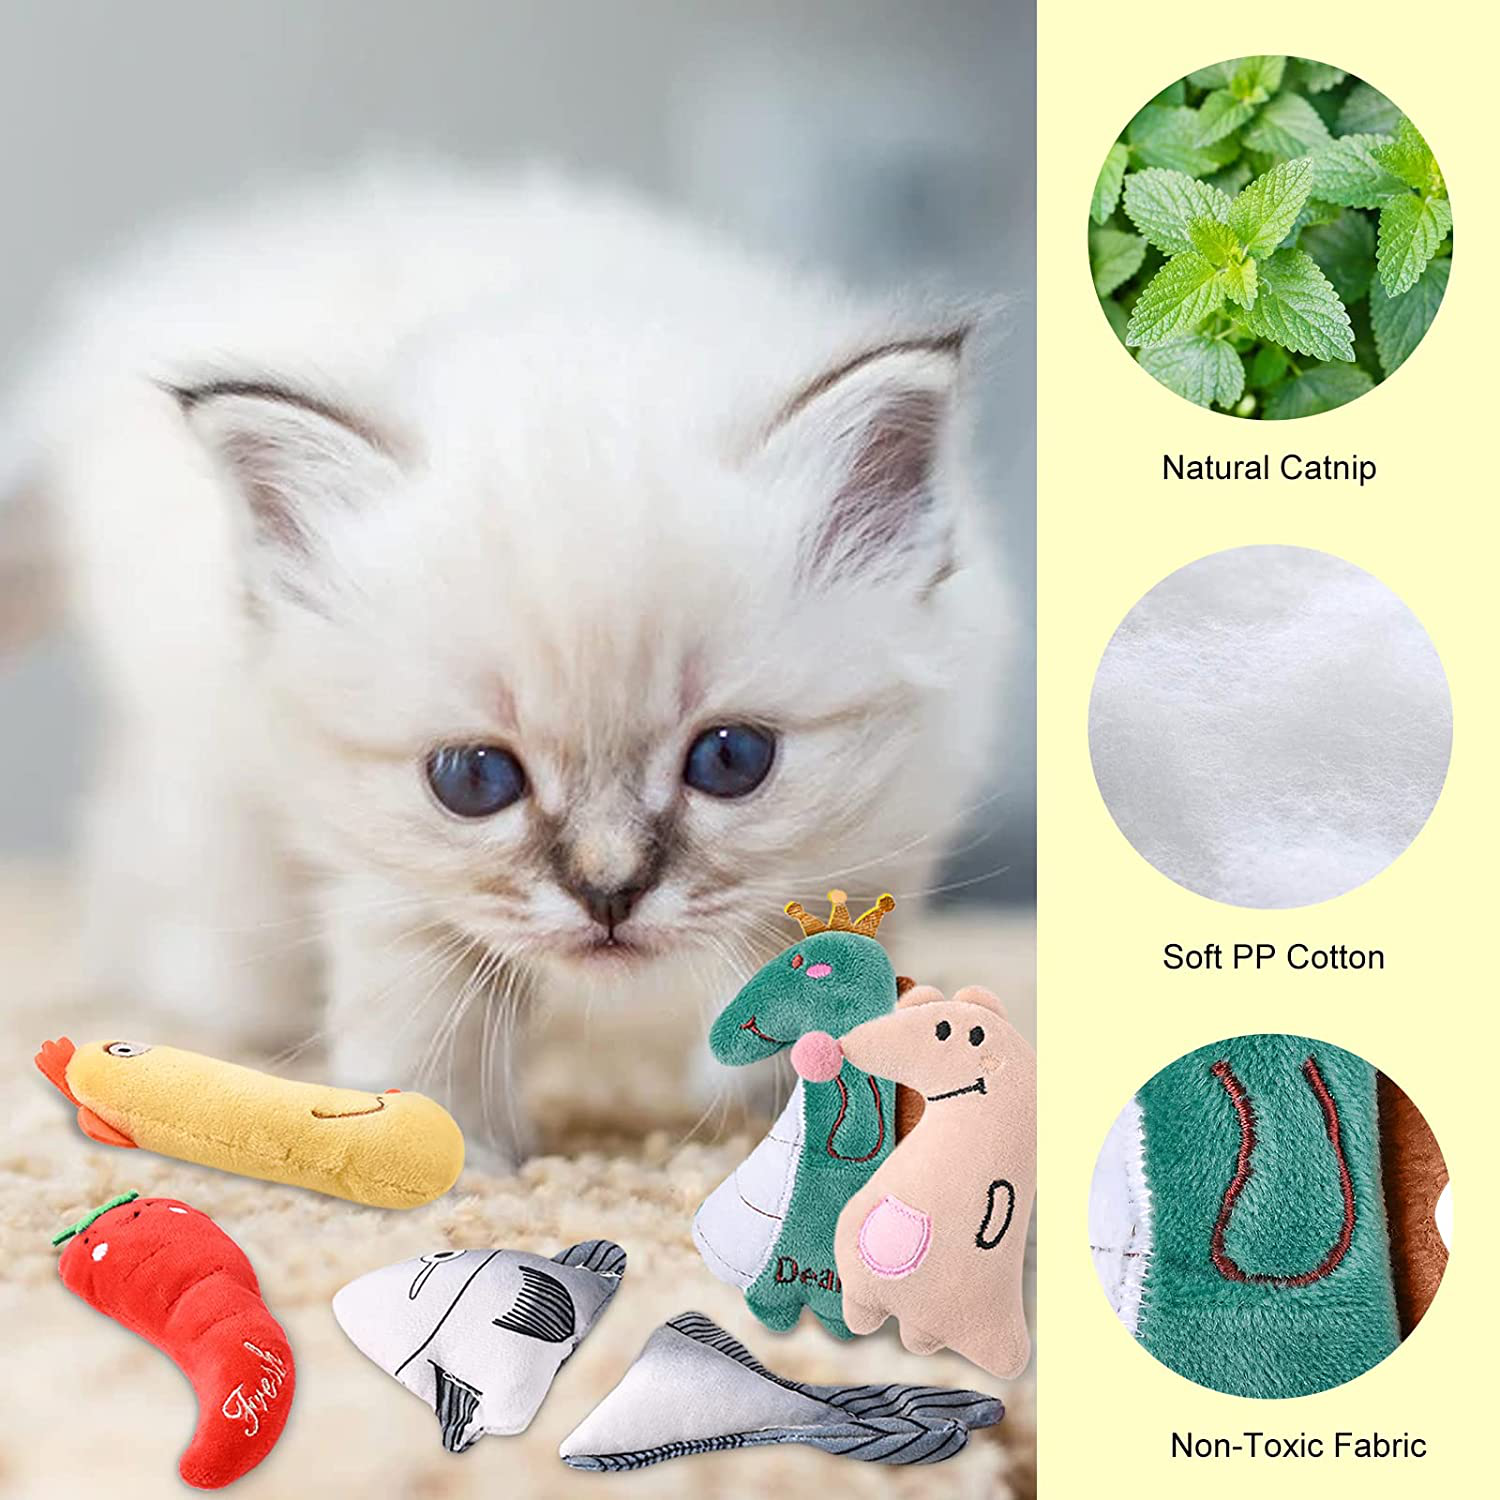 Guzack Catnip Toys 6Pcs, Cat Toys for Indoor Cats, Cat Teething Chew Toy Bite Resistant Catnip Toys, Catnip Filled Cat Pillow Toys Kitten Toy Set, Small Cute Plush Pet Kitty Interactive Cat Toys